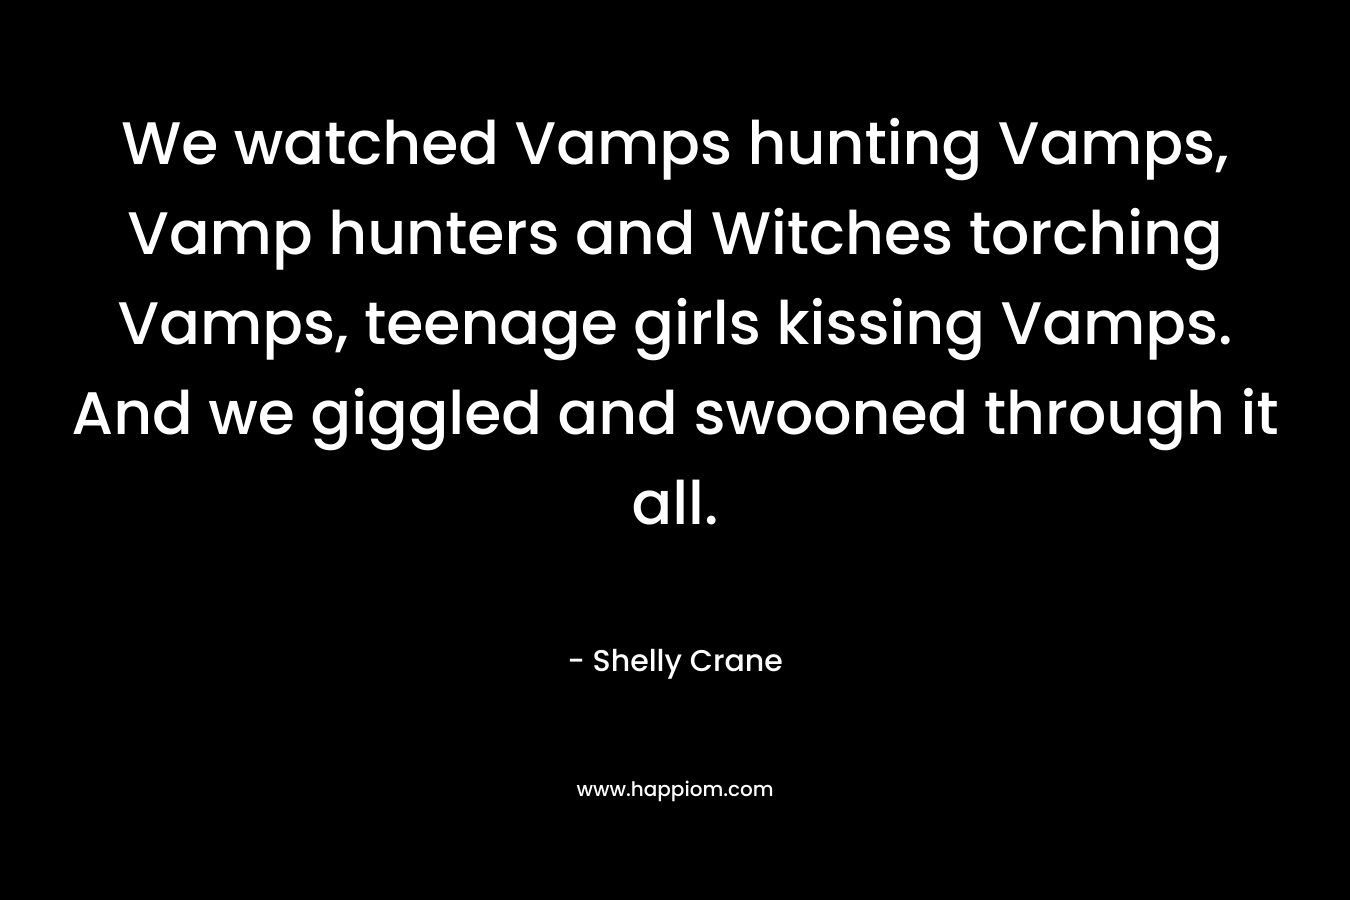 We watched Vamps hunting Vamps, Vamp hunters and Witches torching Vamps, teenage girls kissing Vamps. And we giggled and swooned through it all. – Shelly Crane